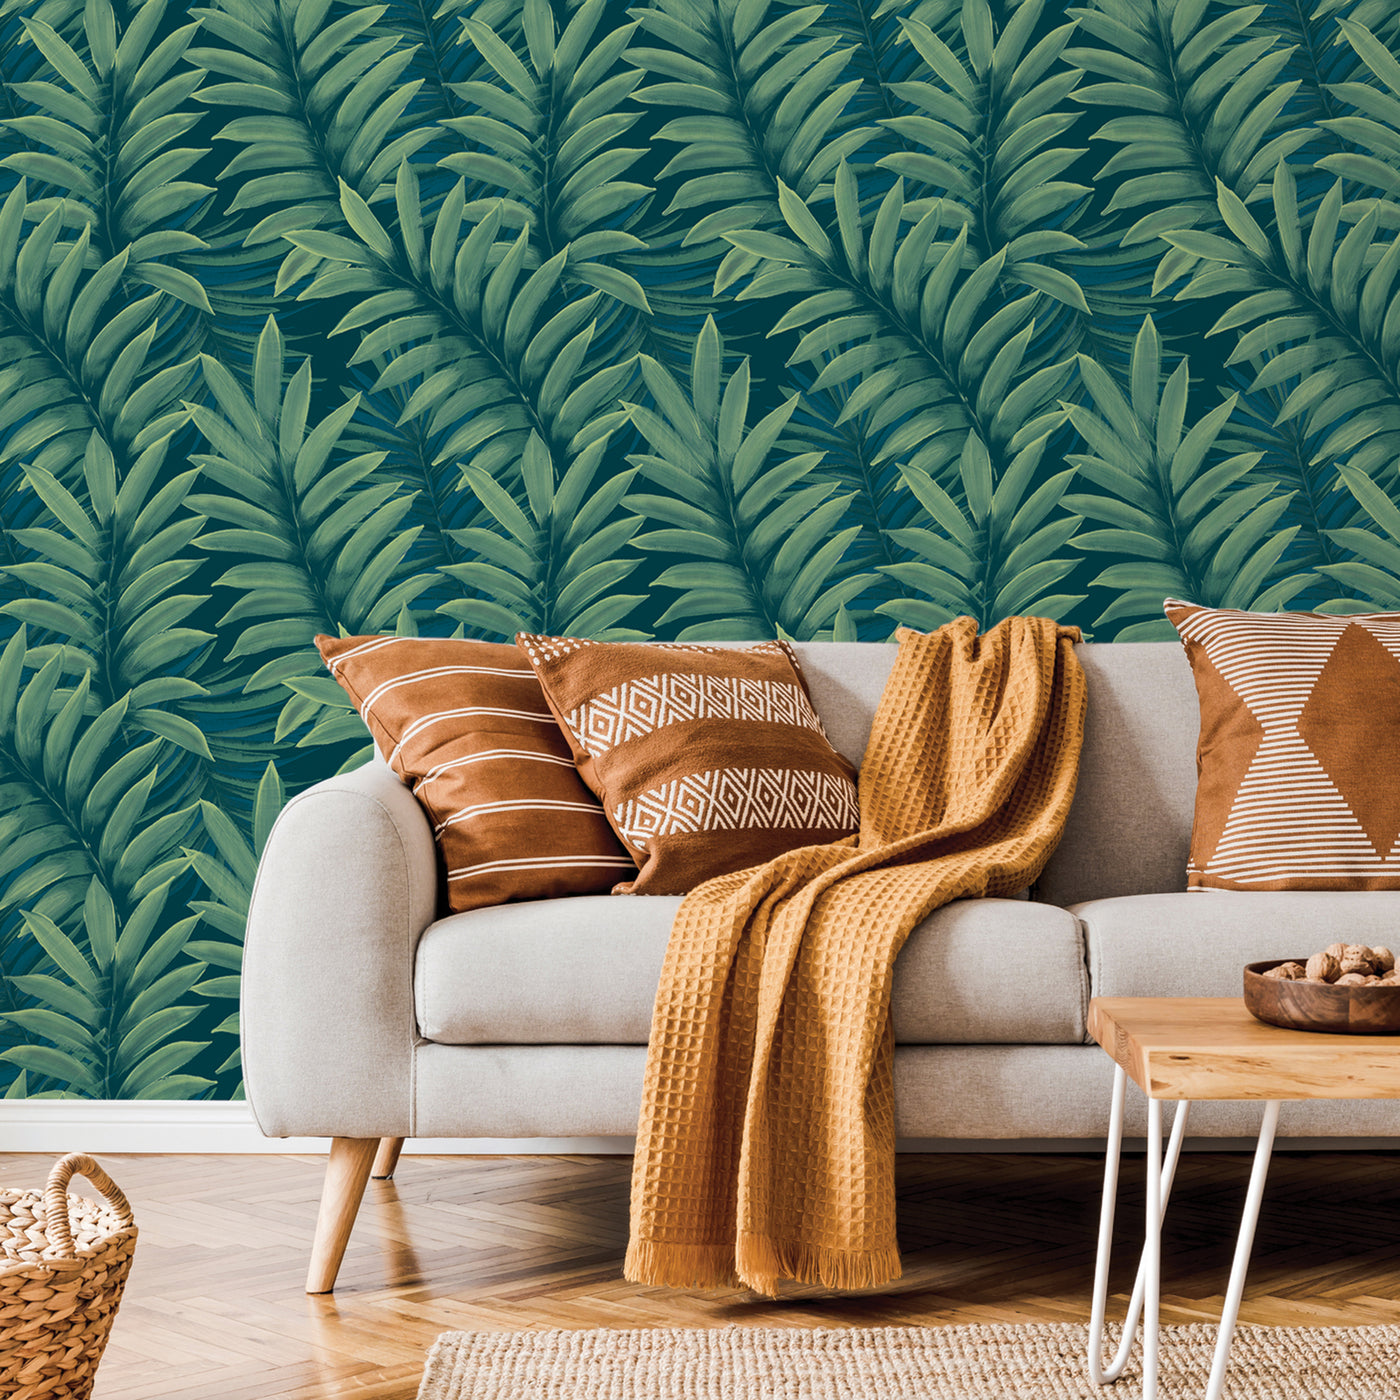 Tempaper's Palm Leaves Temporary Wall Murals behind a grey couch with brown pillows.